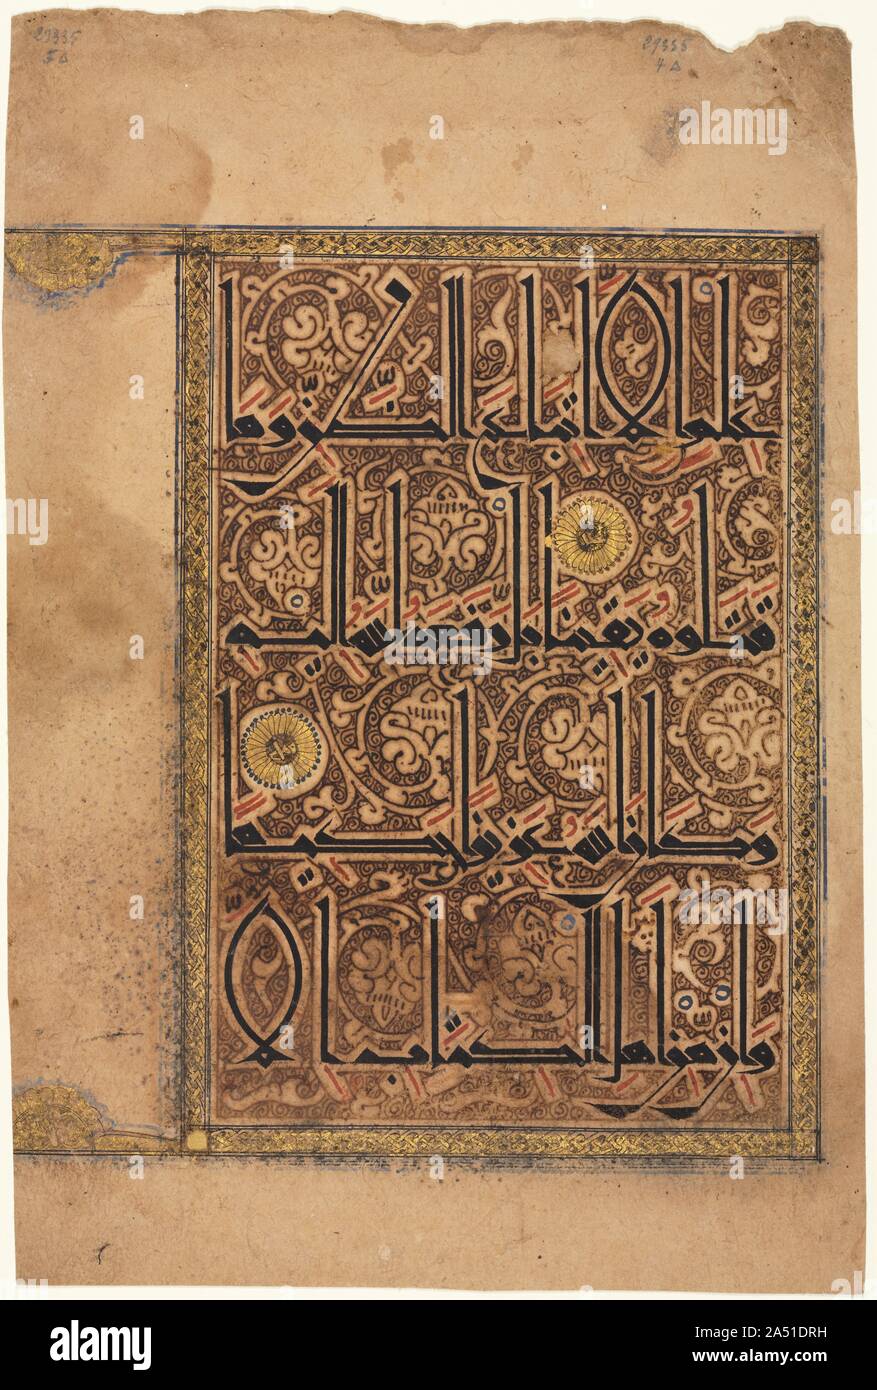 Leaf from a Koran, 1100s. Arabic calligraphy, the art of beautiful writing, was elevated above all other art forms in the Islamic world because Allah, or God, revealed the divine word of Islam to the Prophet Muhammad (570-632) in the Arabic language. This Koran page is considered one of the most splendid examples of Arabic calligraphy. Based on the proportions of Arabic letters, majestic eastern Kufic script features attenuated letters with long upstrokes and low strokes swaying to the left. Contours echoing the letters separate the sacred text from the lively arabesque background. This vertic Stock Photo